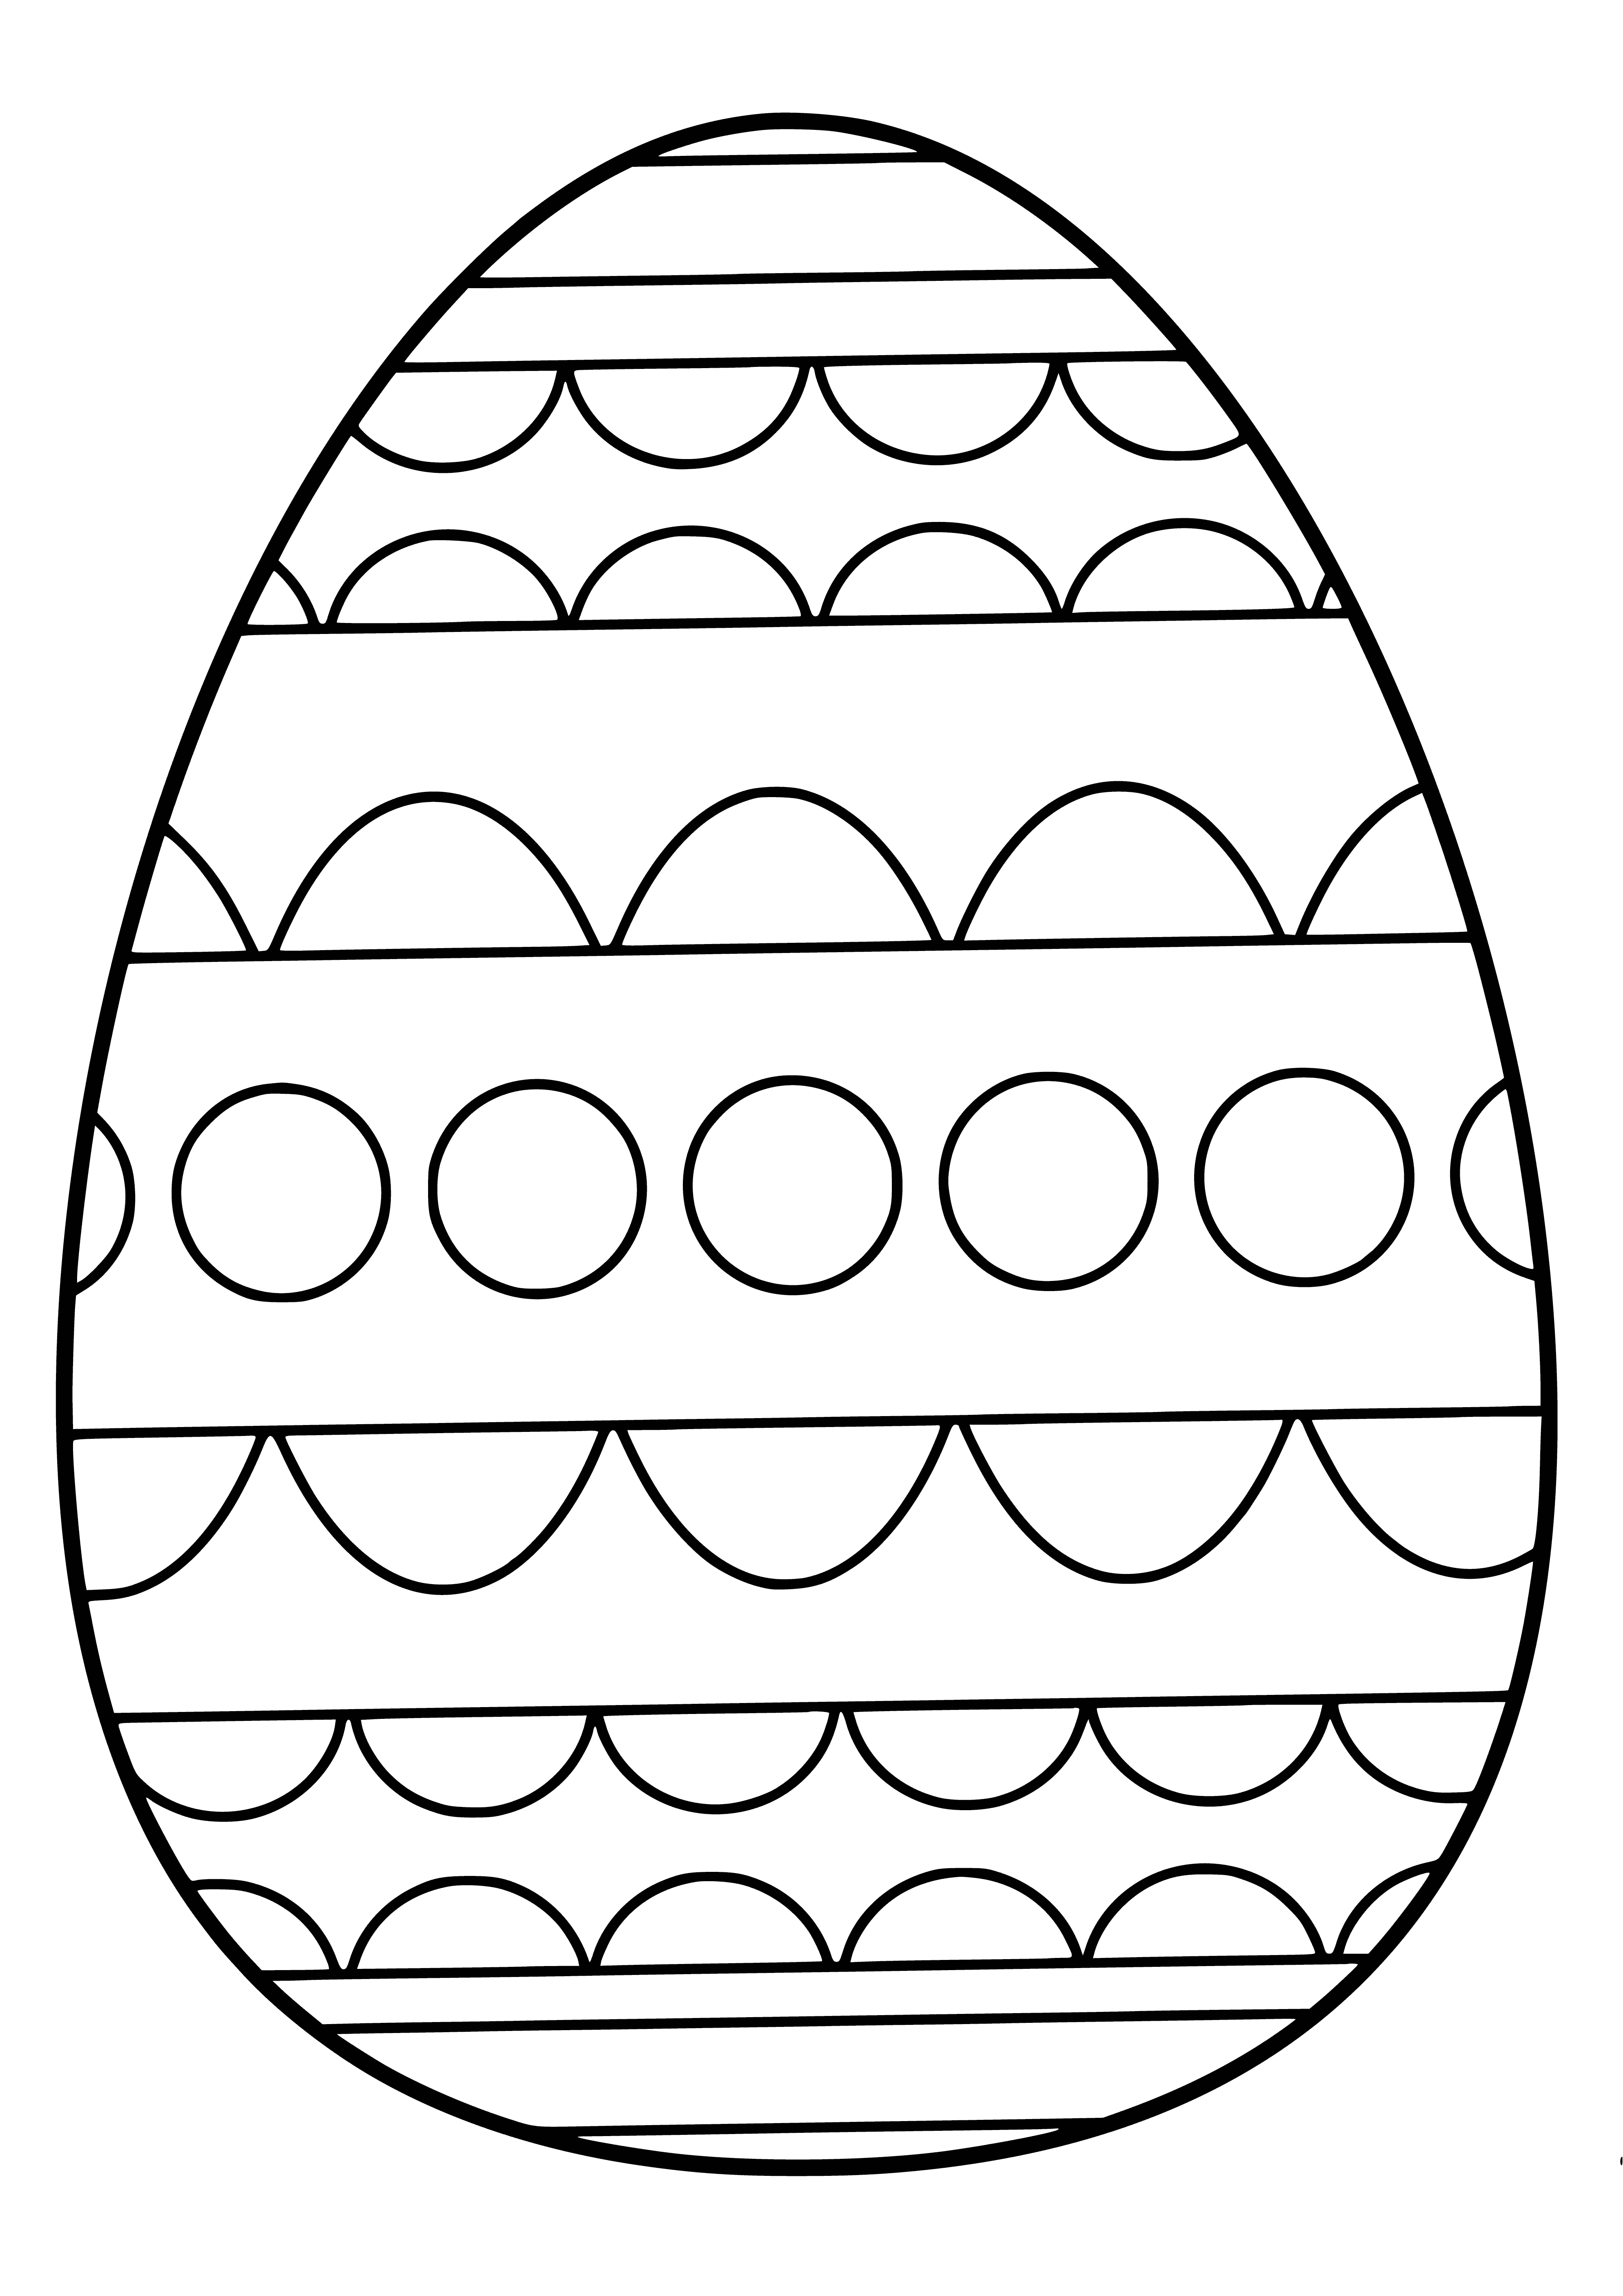 coloring page: #EasterEggs #ColoringPages